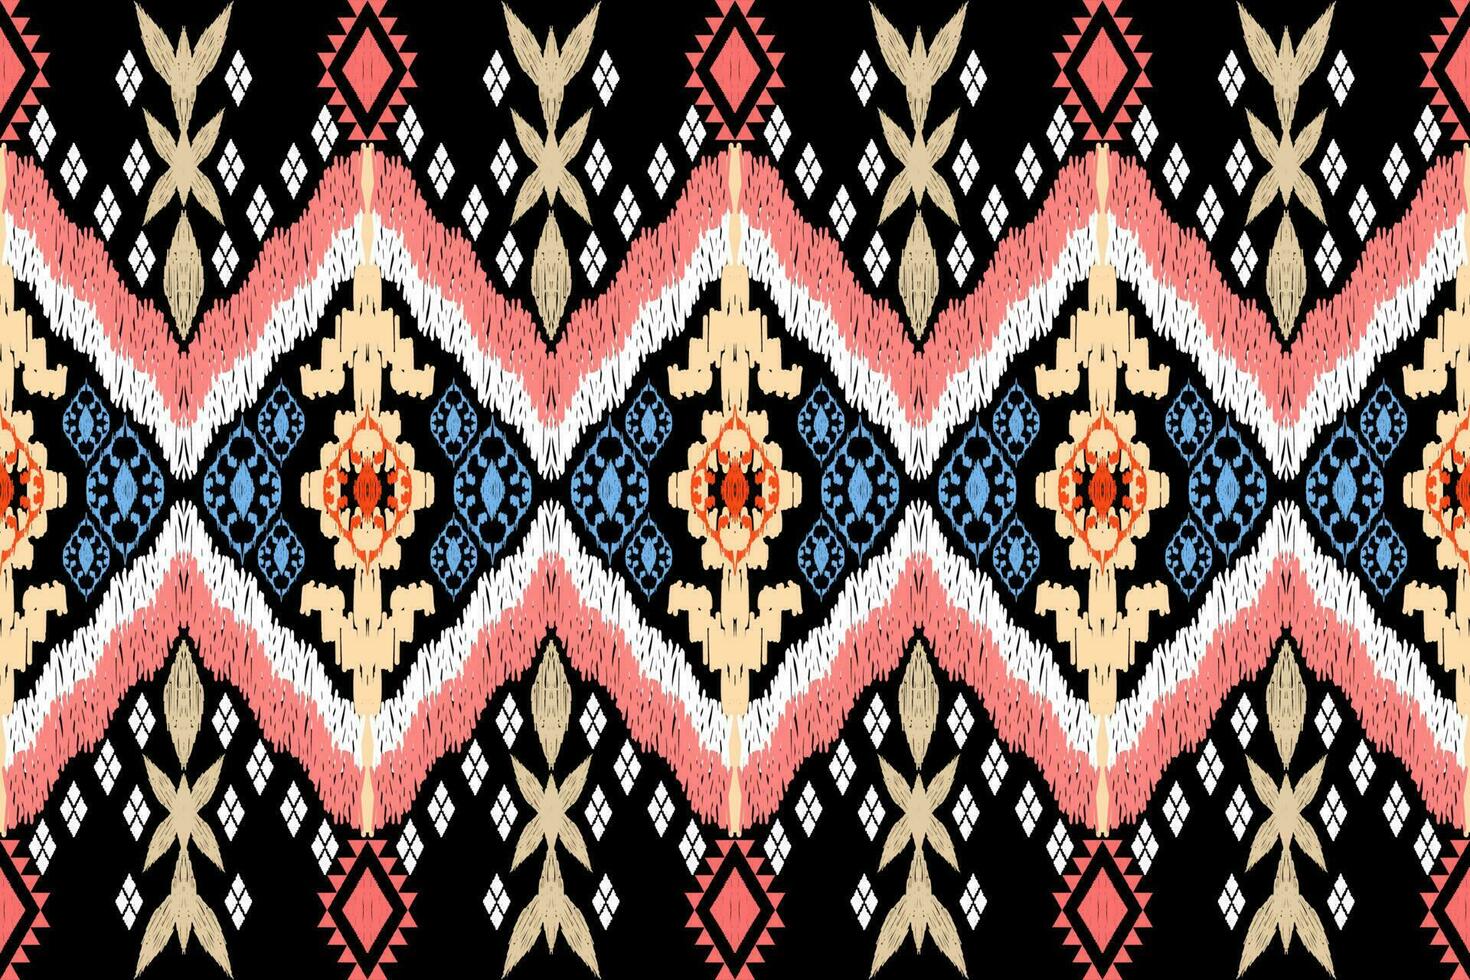 Ethnic Figure aztec embroidery style. Geometric ikat oriental traditional art pattern.Design for ethnic background,wallpaper,fashion,clothing,wrapping,fabric,element,sarong,graphic,vector illustration vector